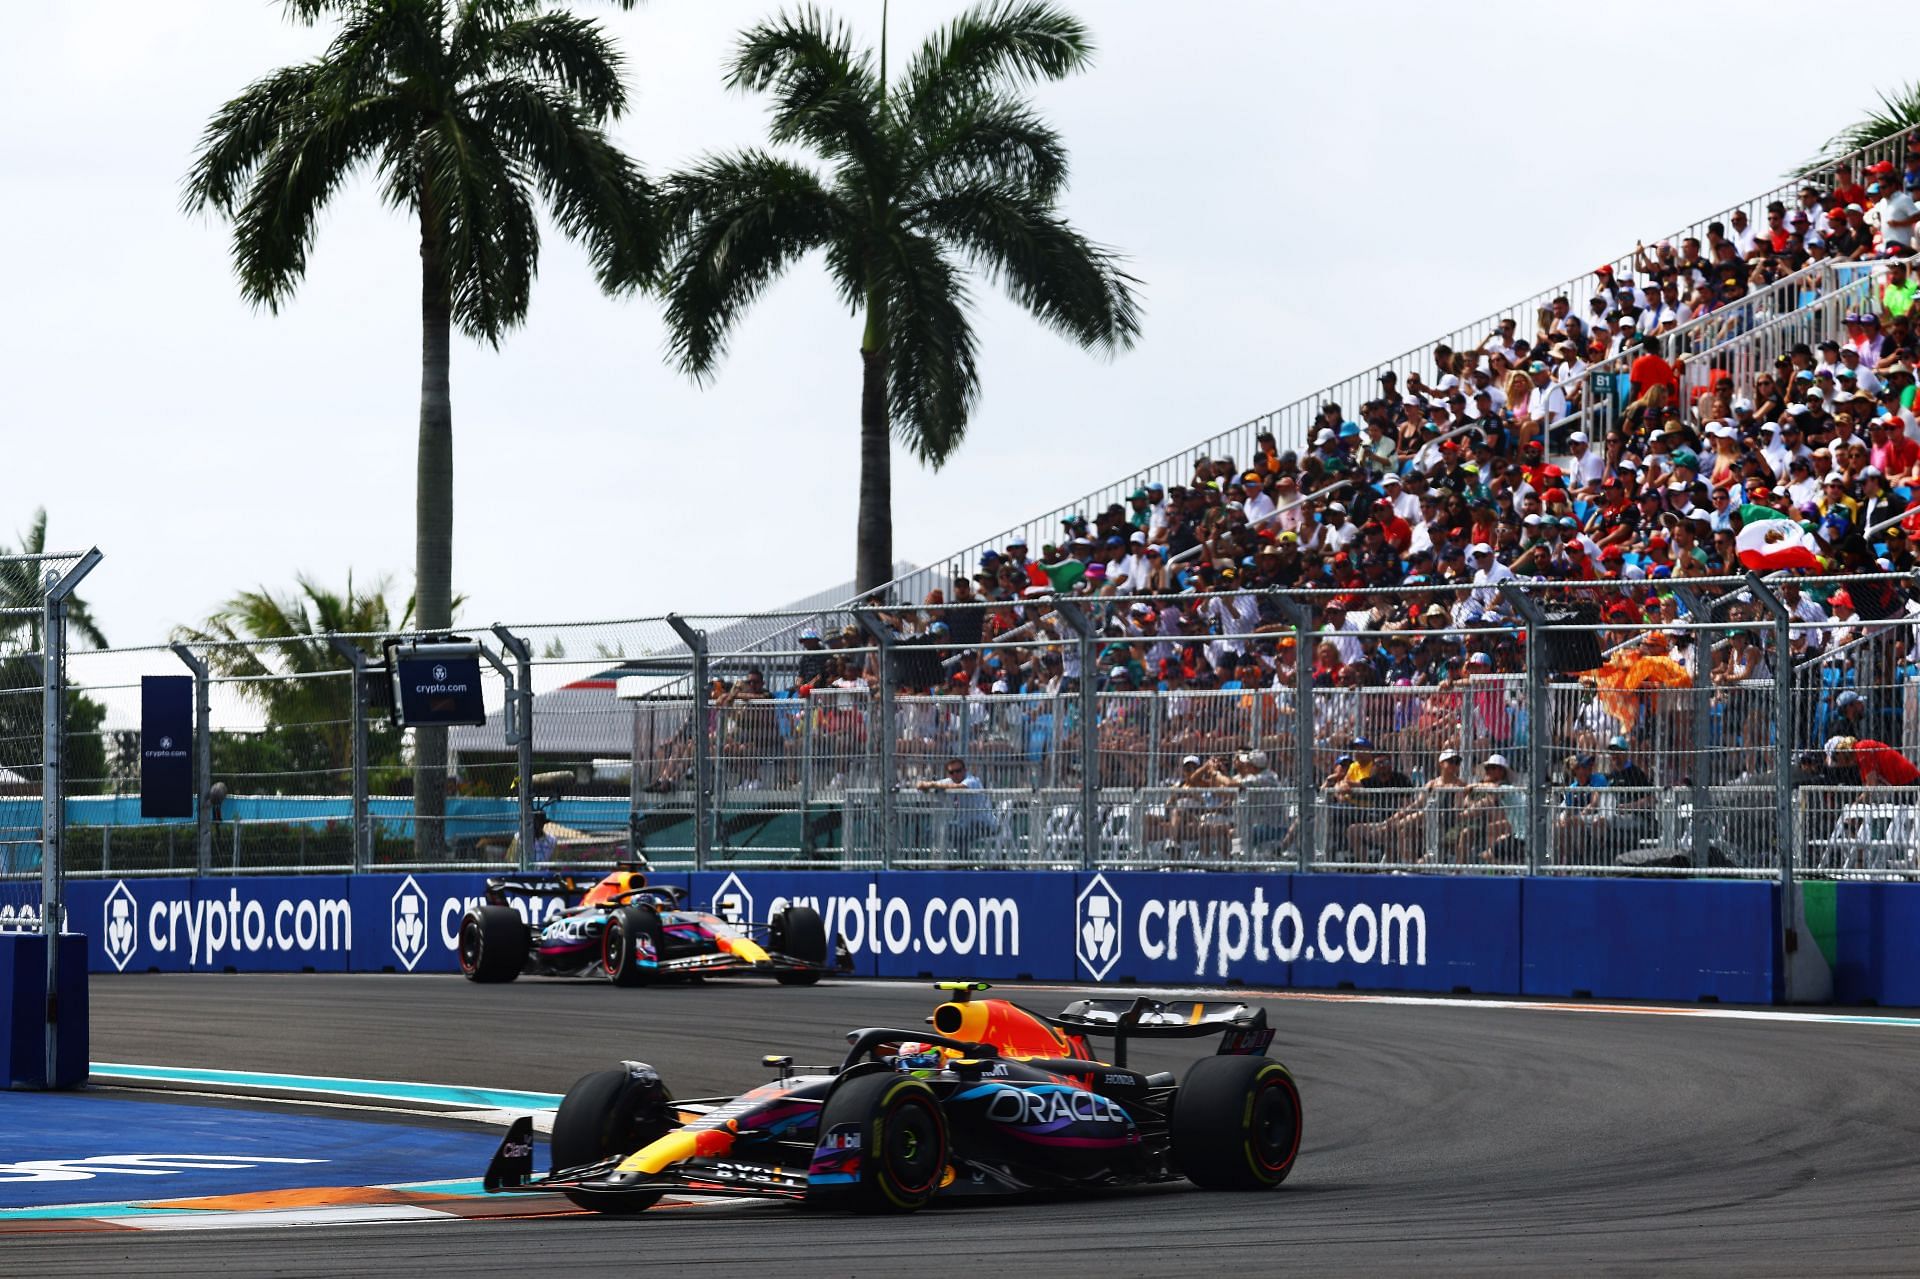 Max Verstappen and Sergio Perez at the Miami GP (Photo by Mark Thompson/Getty Images)